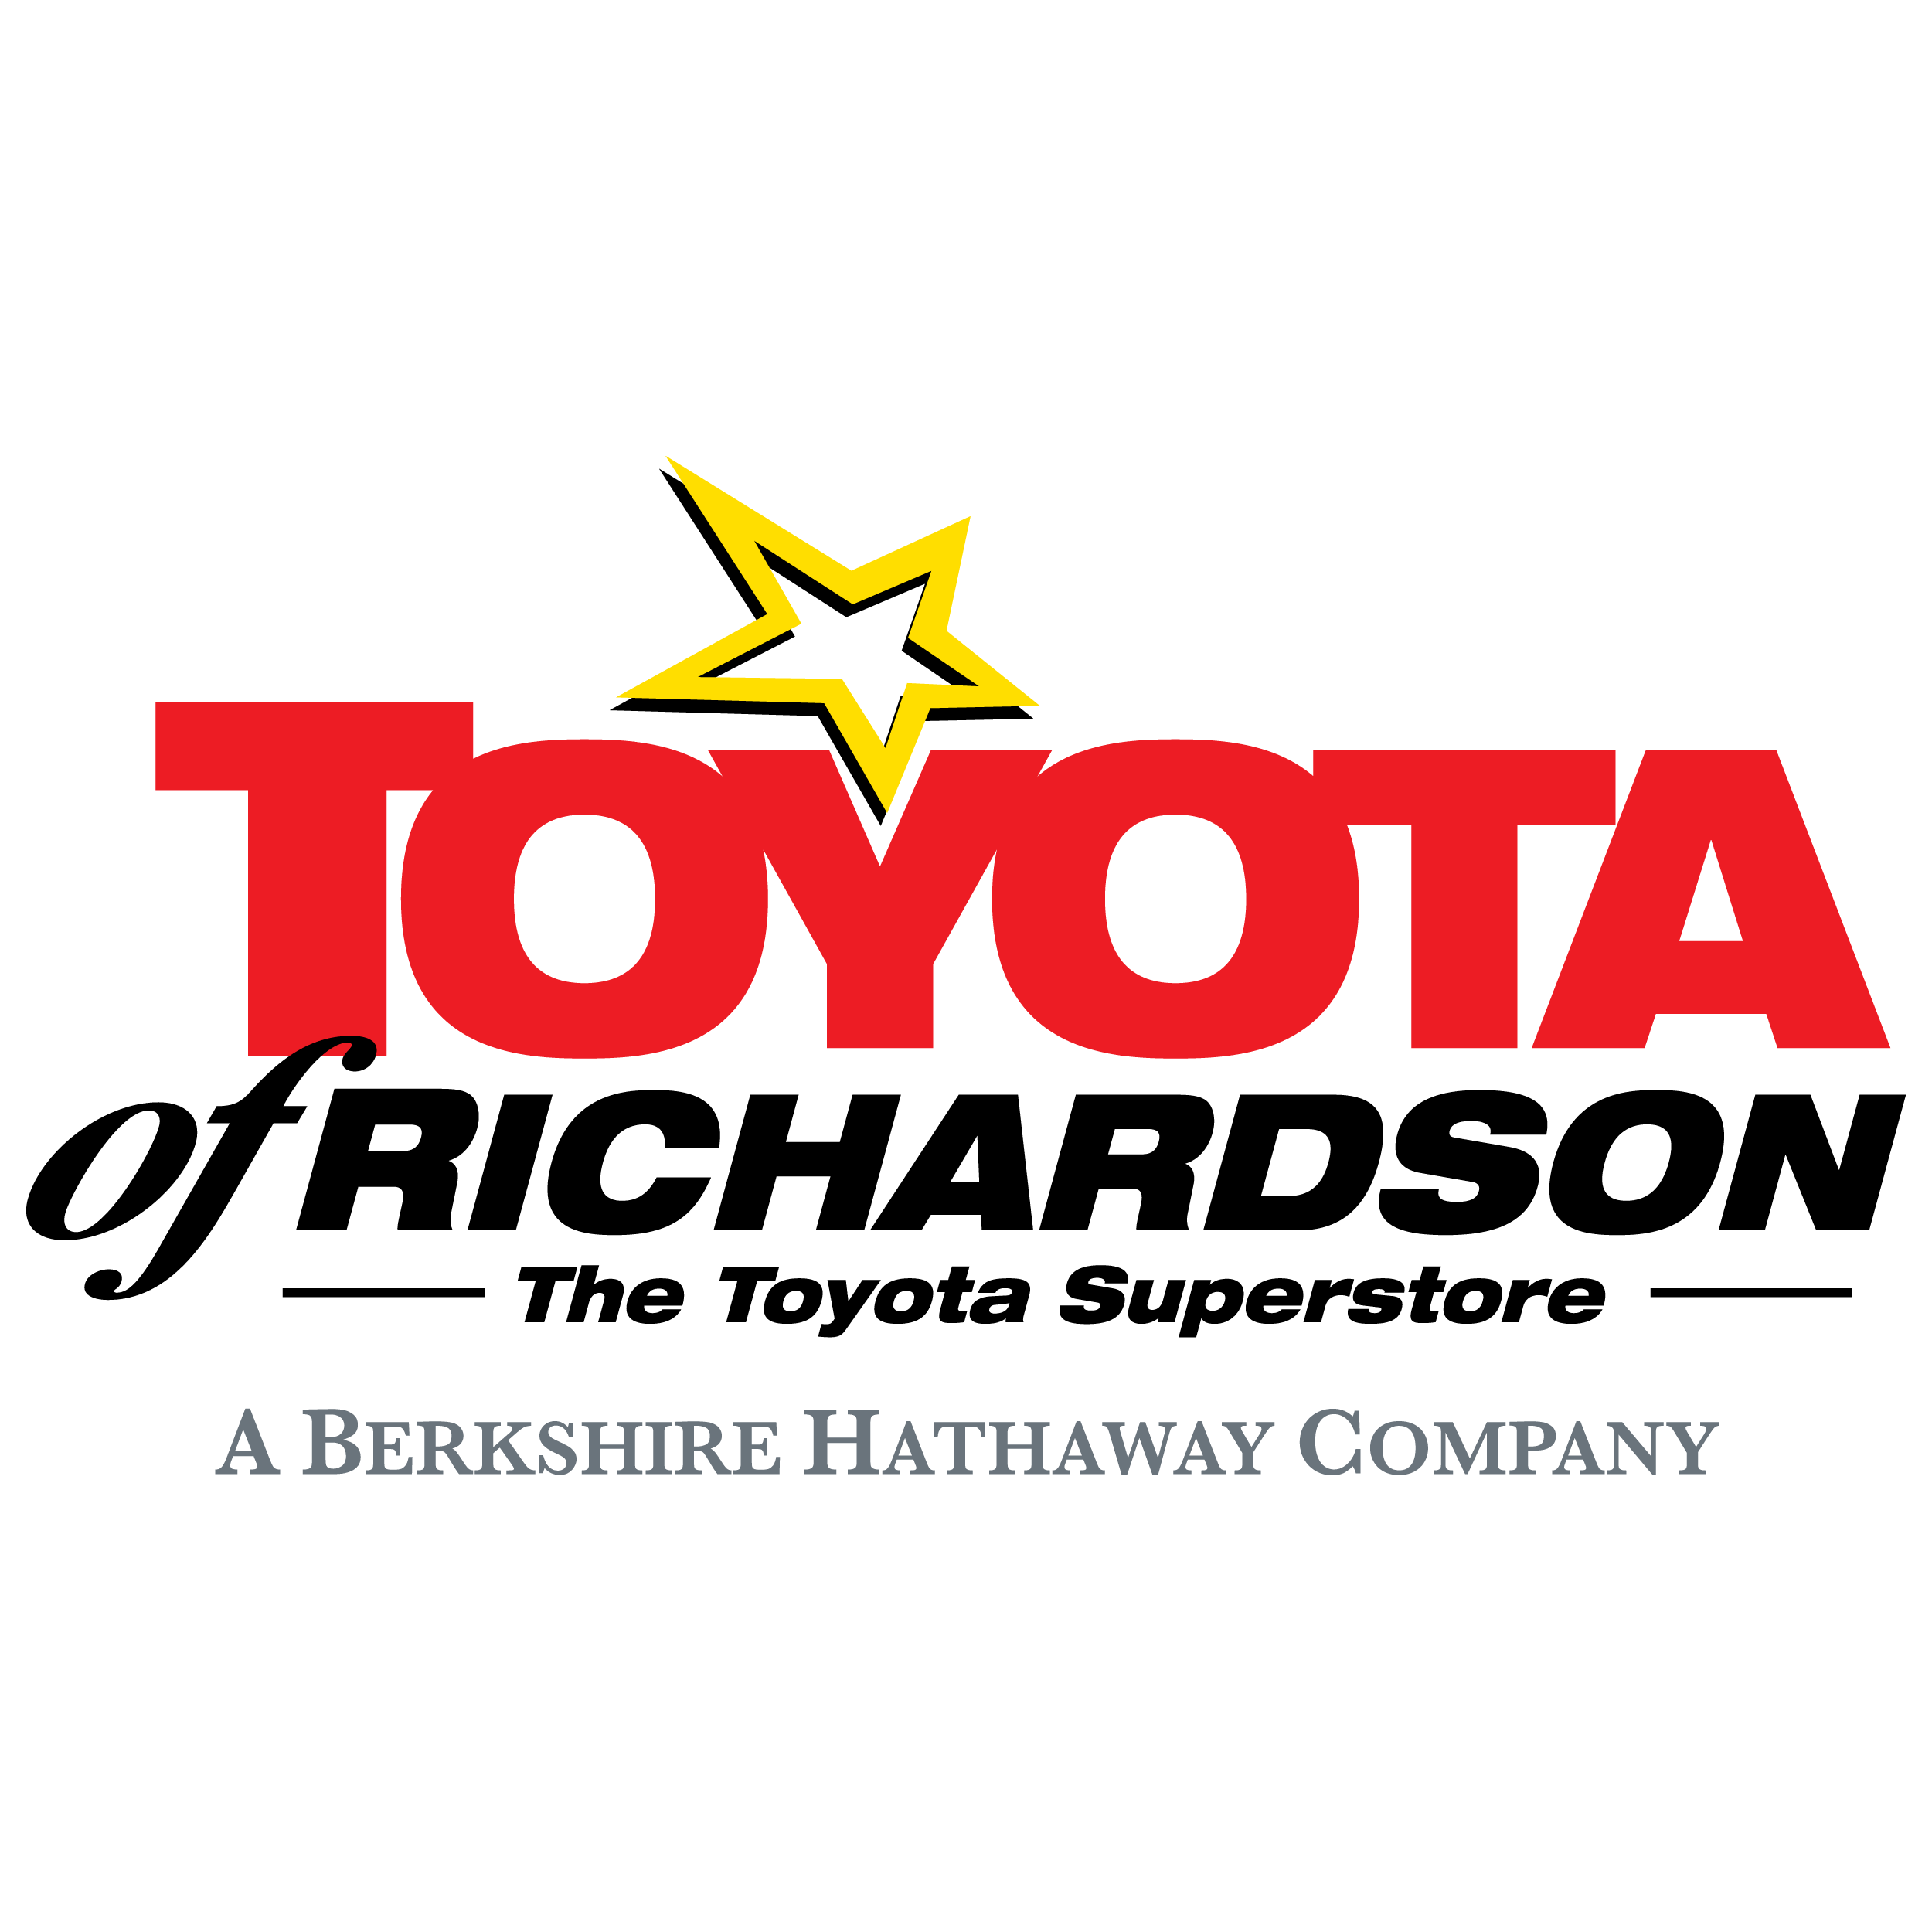 We have received the coveted Toyota President's Award several times, more than any other dealership in the Dallas Ft. Worth area. Call: 972-201-9228